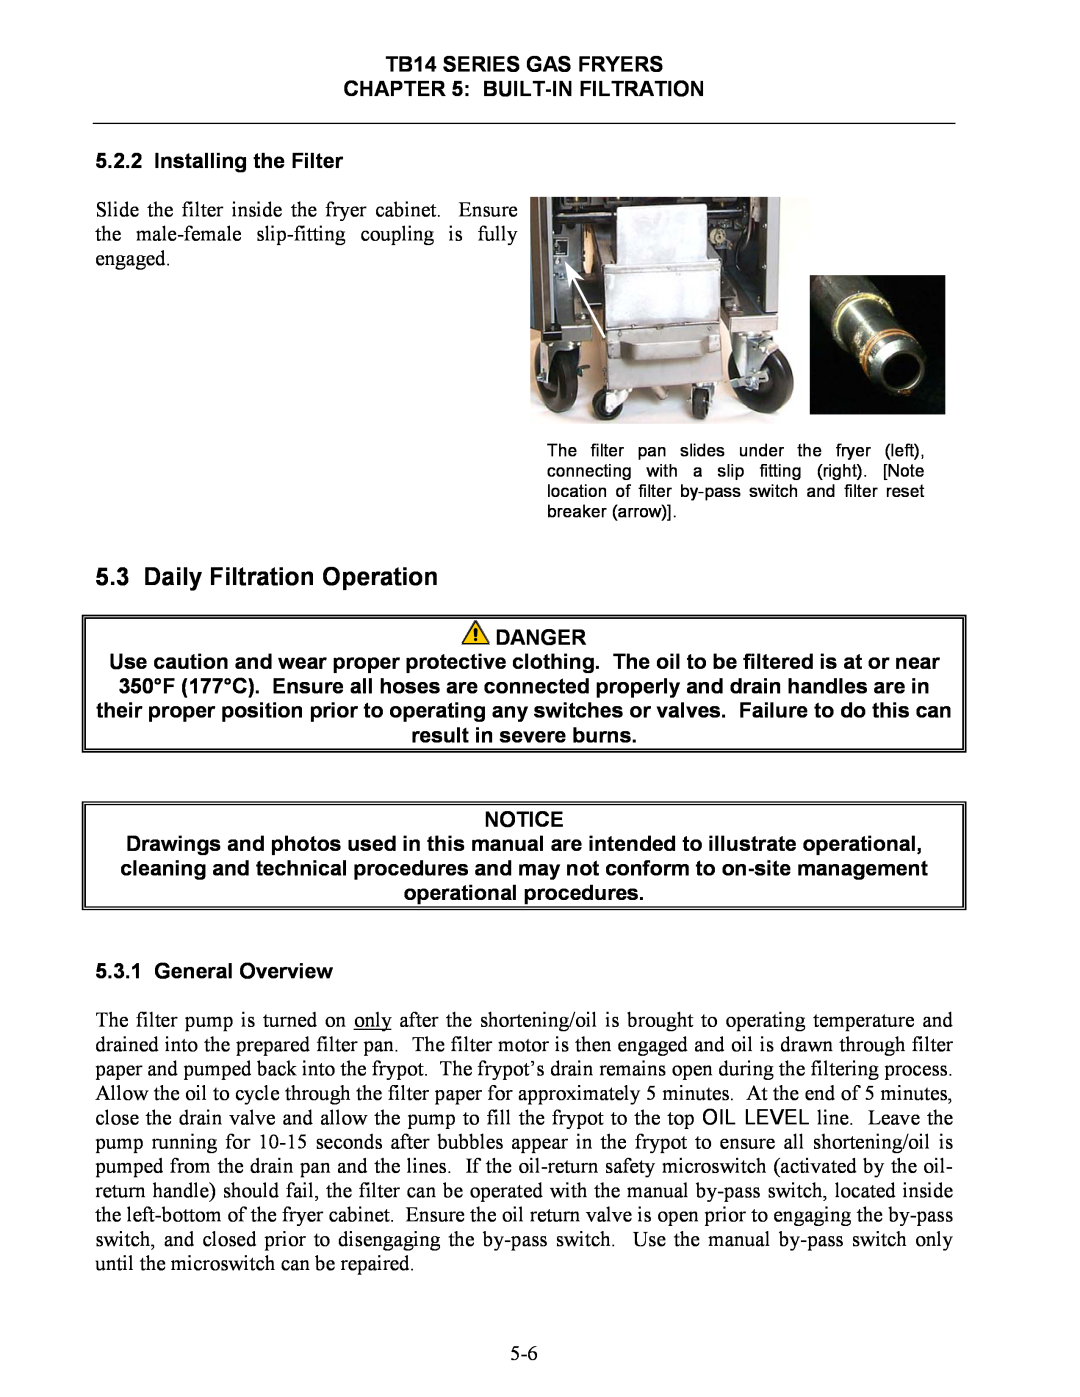 Frymaster TB14 operation manual Daily Filtration Operation, Installing the Filter, General Overview, Danger 